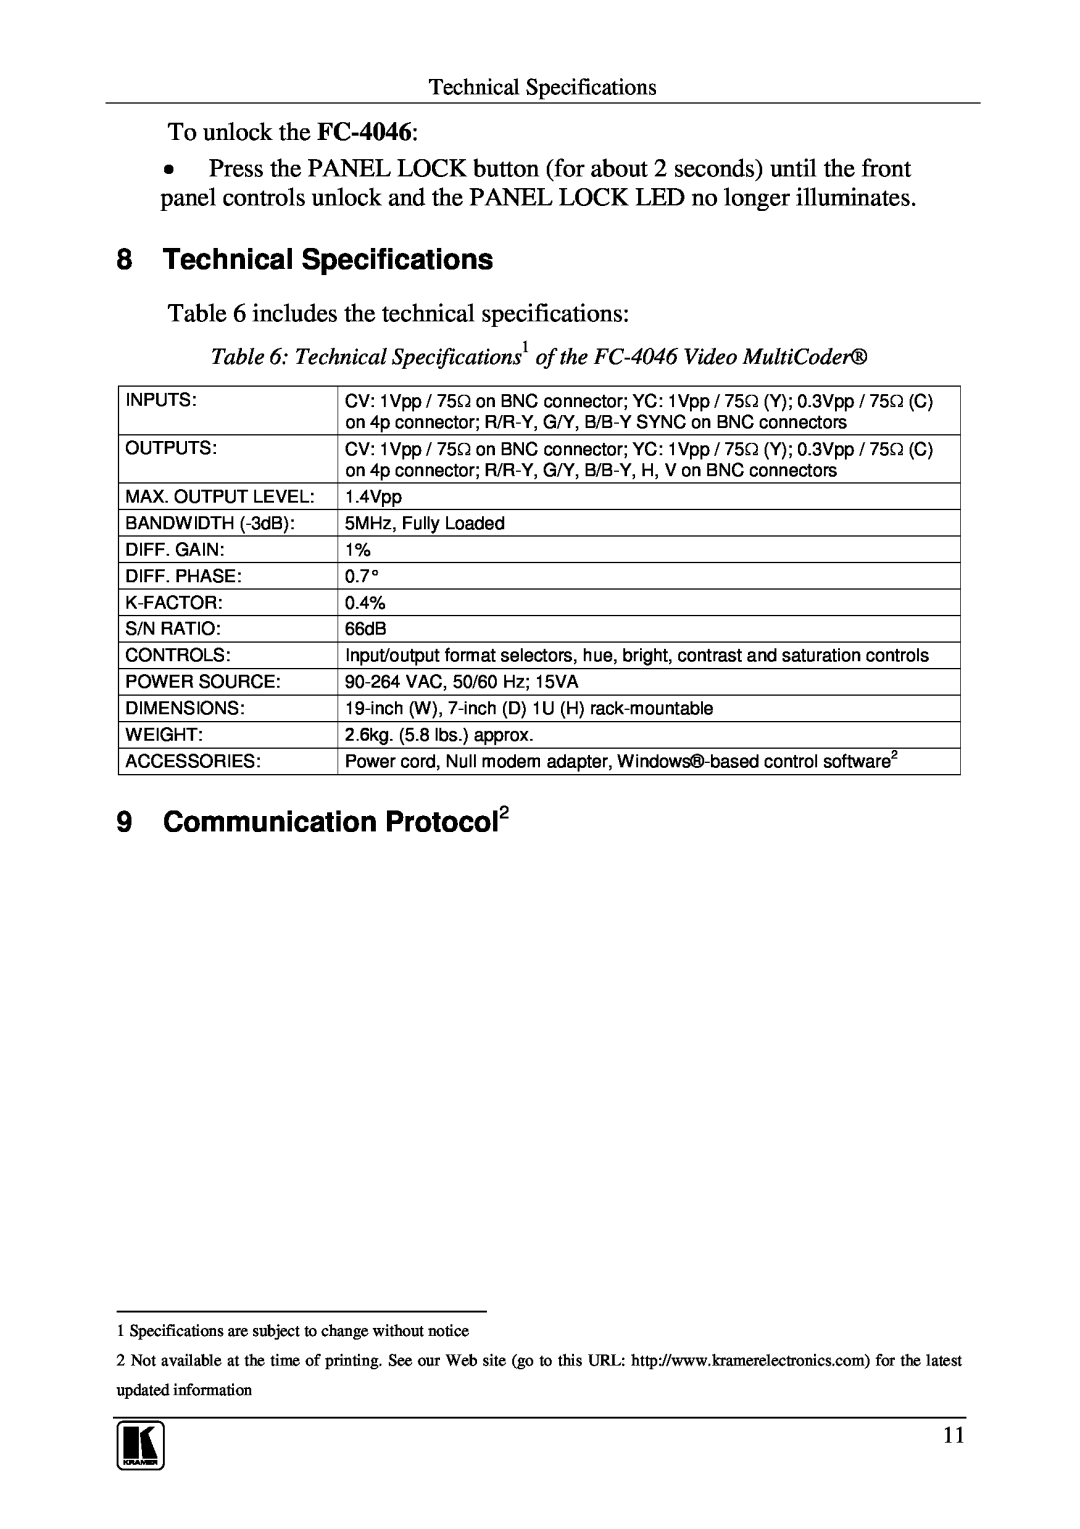 Kramer Electronics user manual Technical Specifications, Communication Protocol2, To unlock the FC-4046 